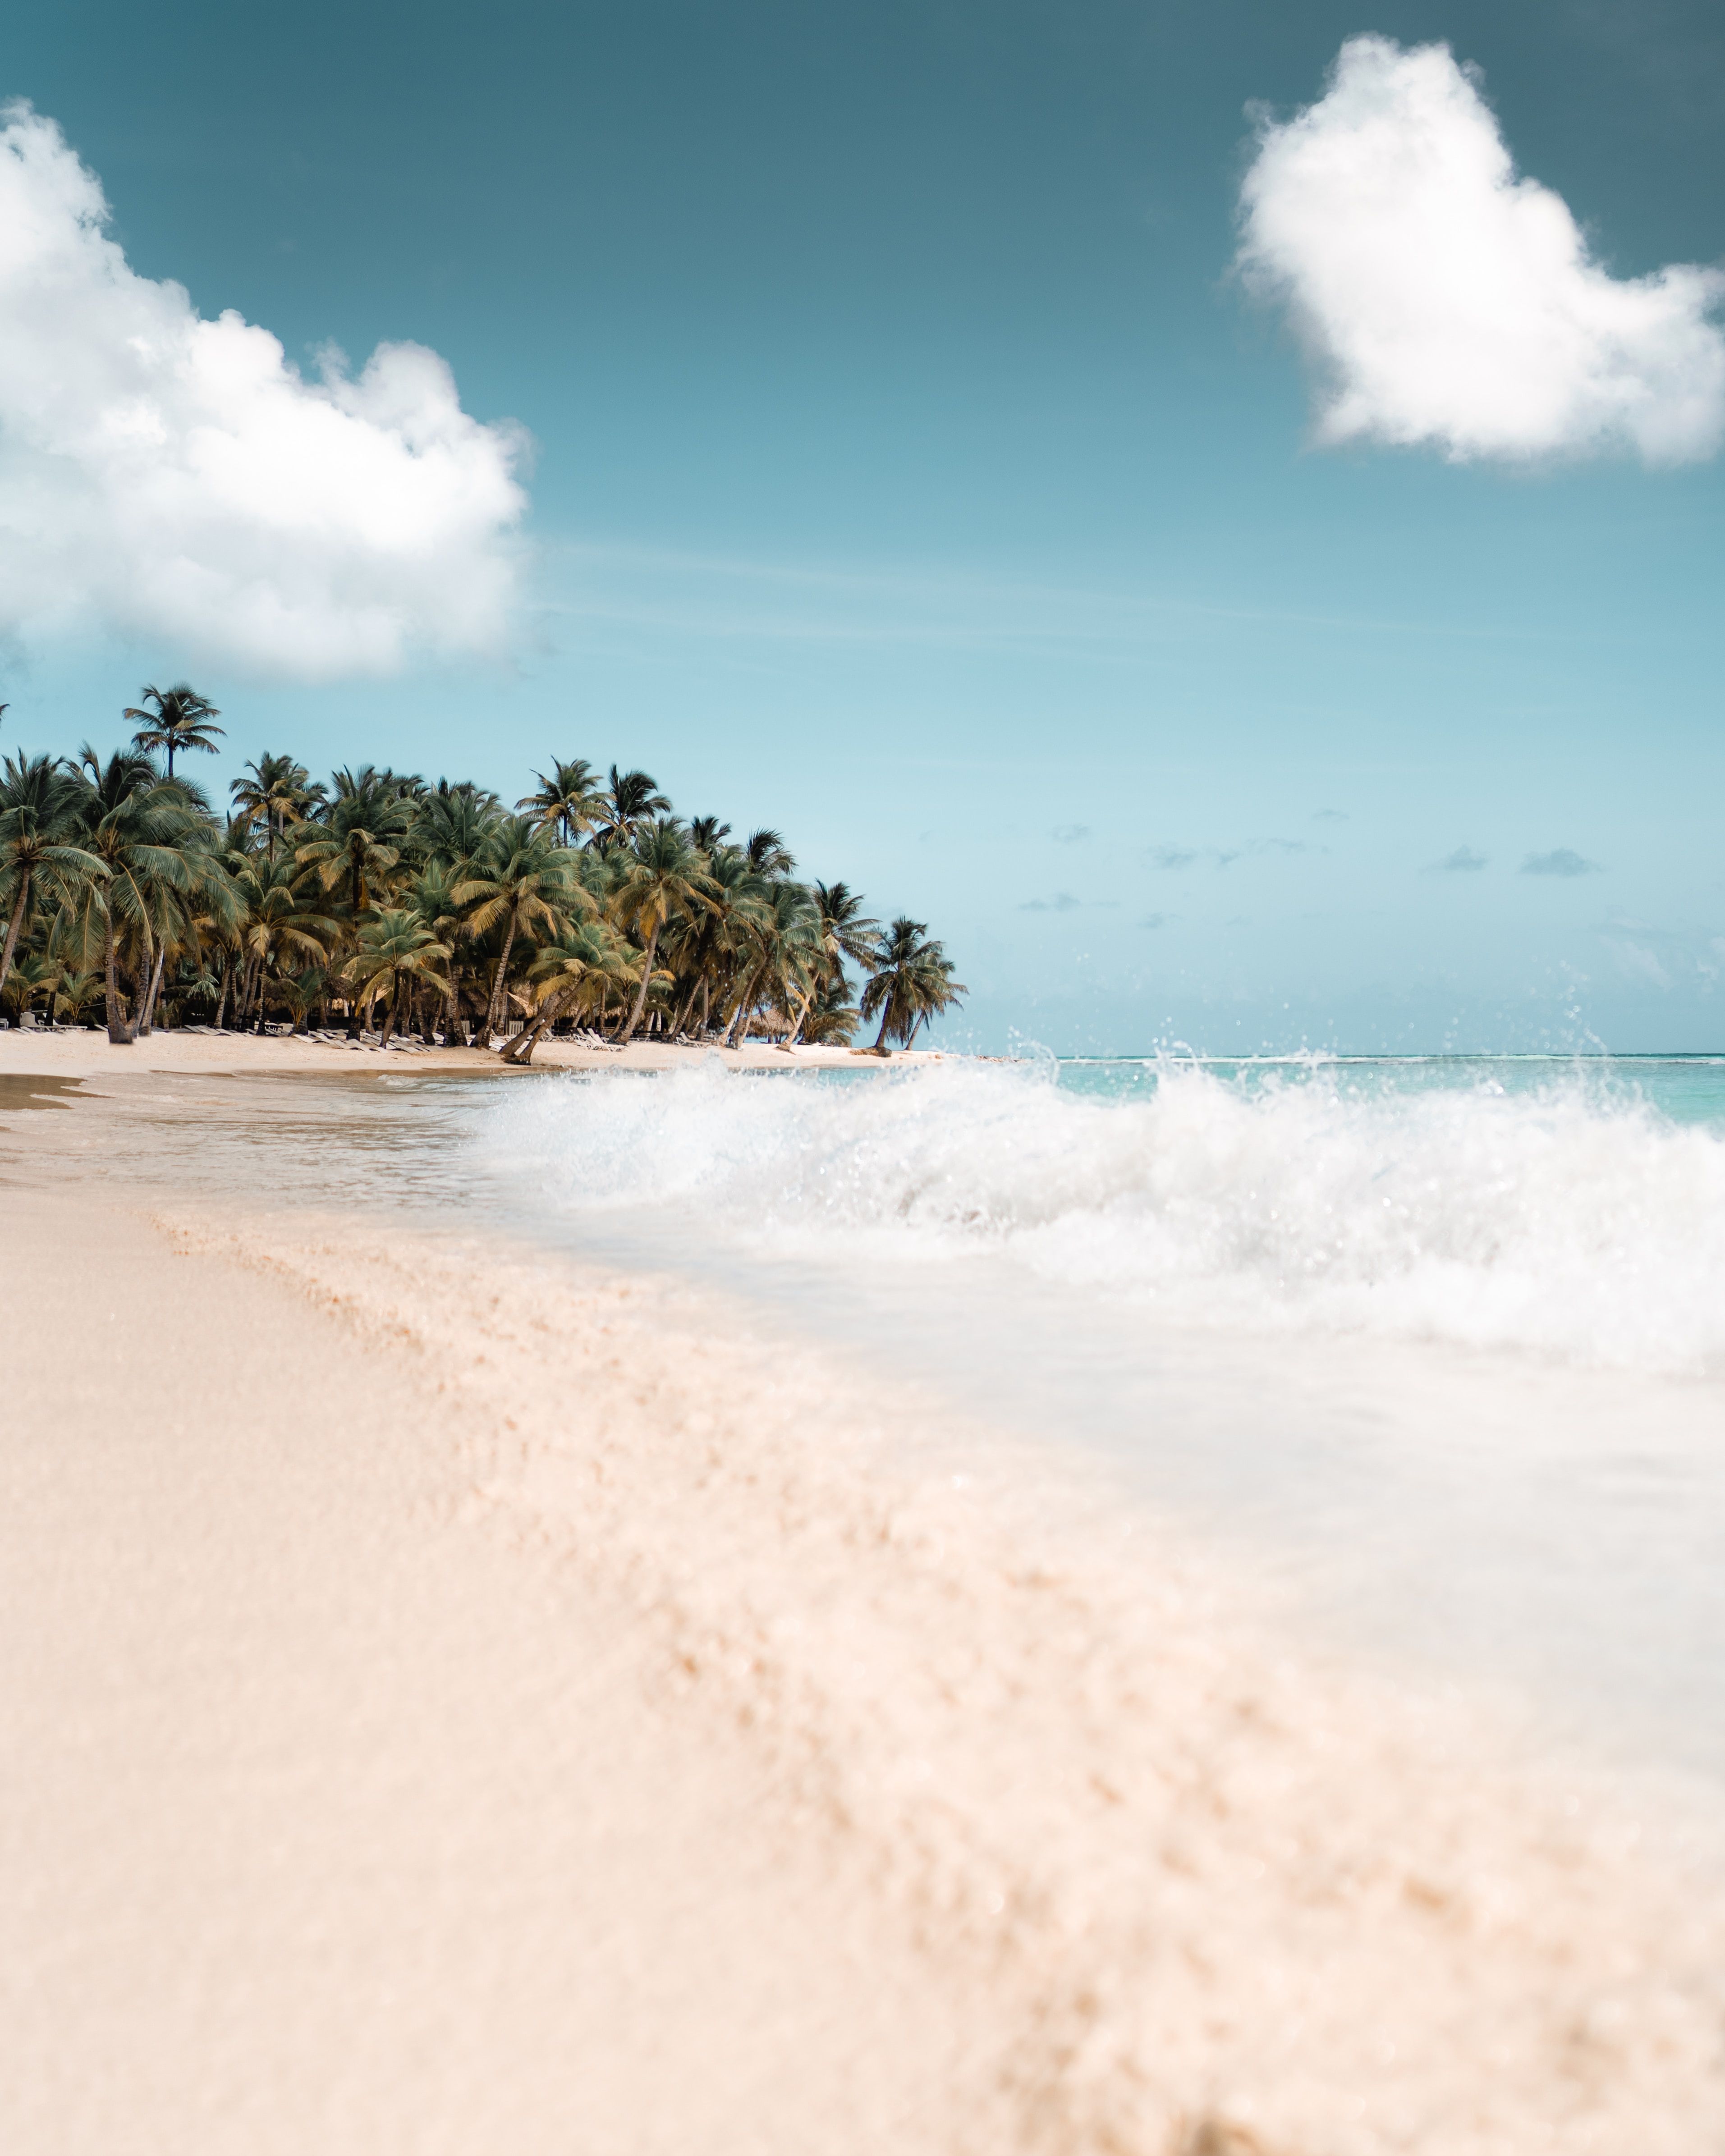 A beach with palm trees and waves - Beach